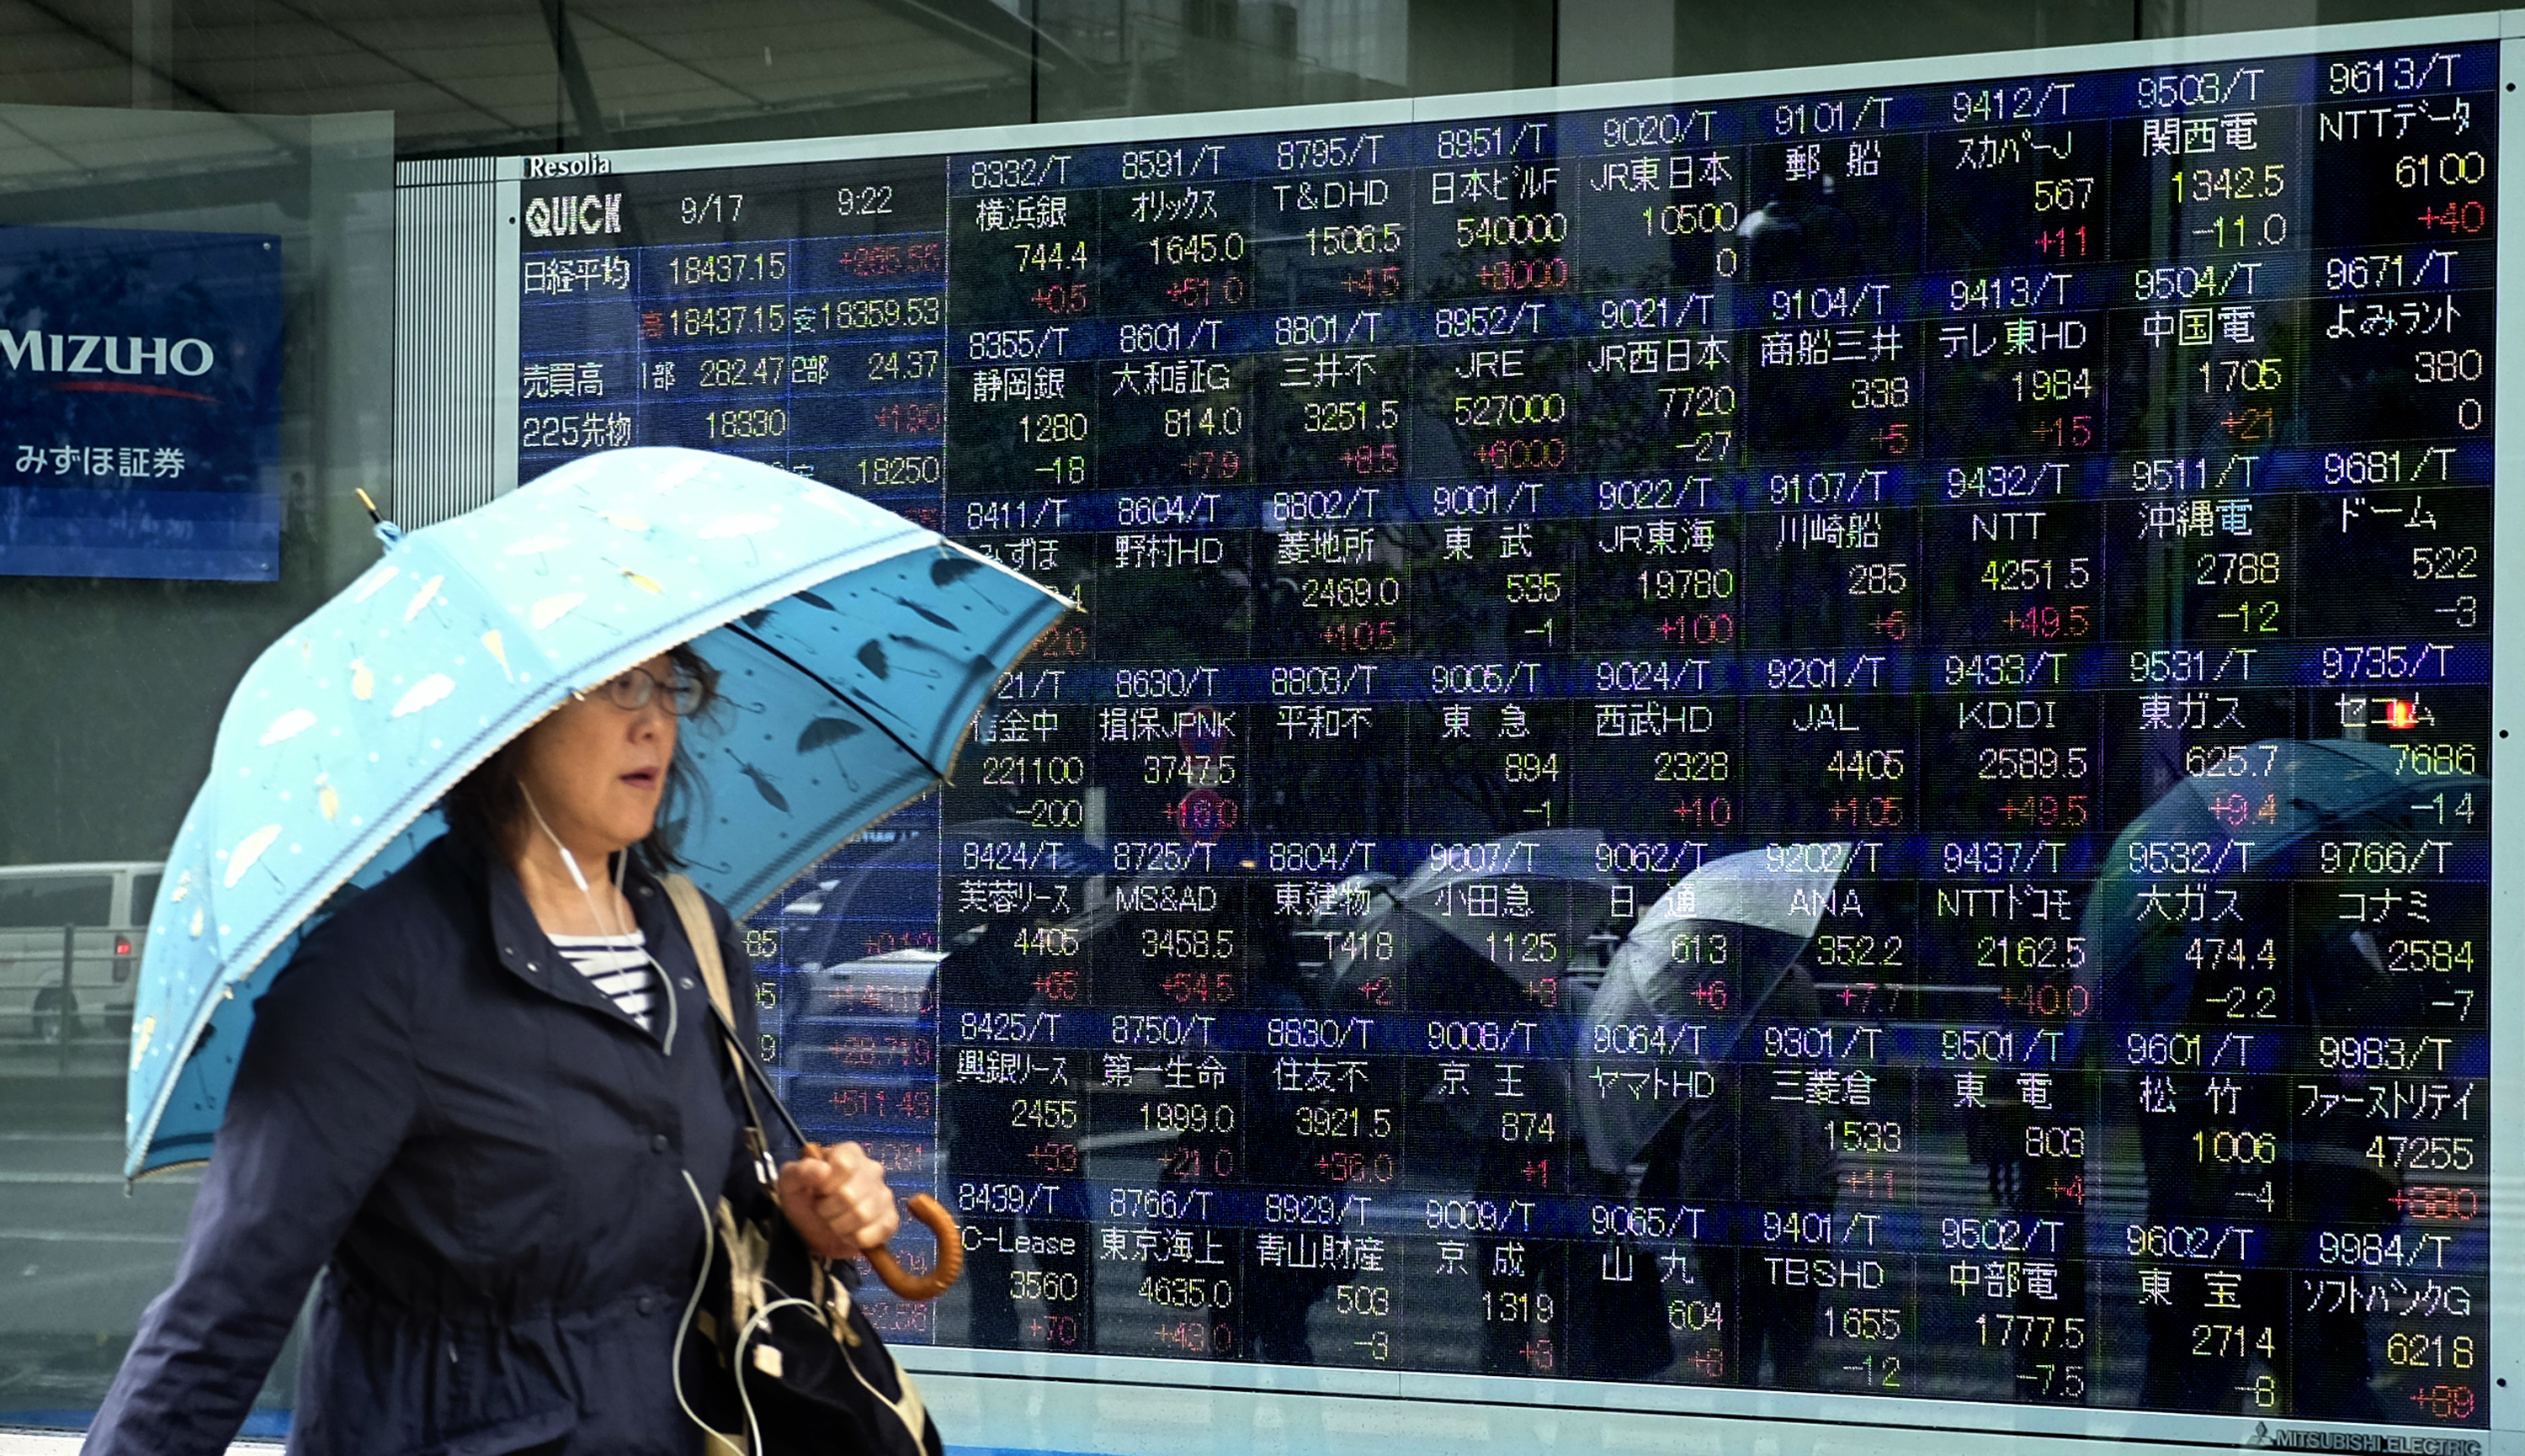 A pedestrian walks past a board showing various share prices on the Nikkei 225 index at the Tokyo Stock Exchange in Tokyo on September 17, 2015. Tokyo shares rose 1.35 percent at the open of trade on September 17, following Wall Street higher for a second day ahead of the Federal Reserve's hotly anticipated interest rate decision. AFP PHOTO / KAZUHIRO NOGI / AFP PHOTO / KAZUHIRO NOGI